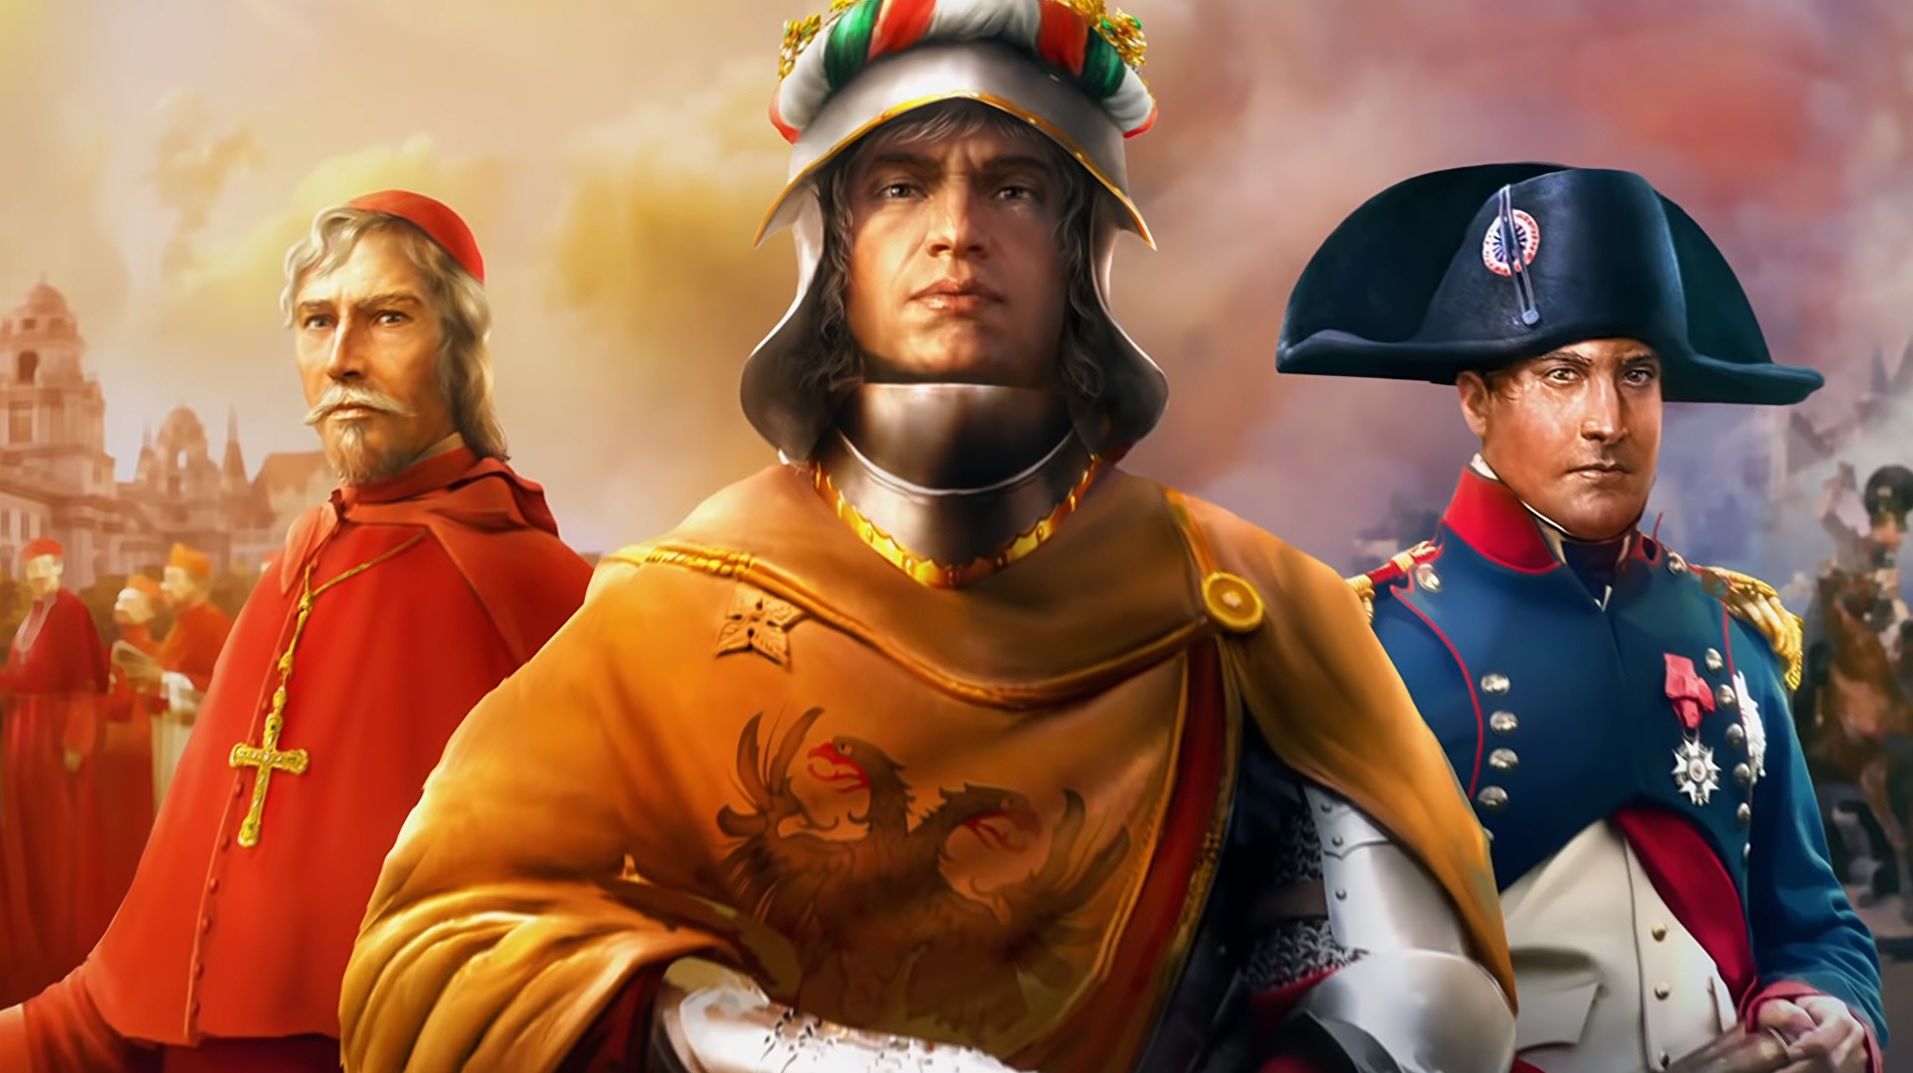 Now Paradox provide a DLC subscription for Europa Universalis 4 too